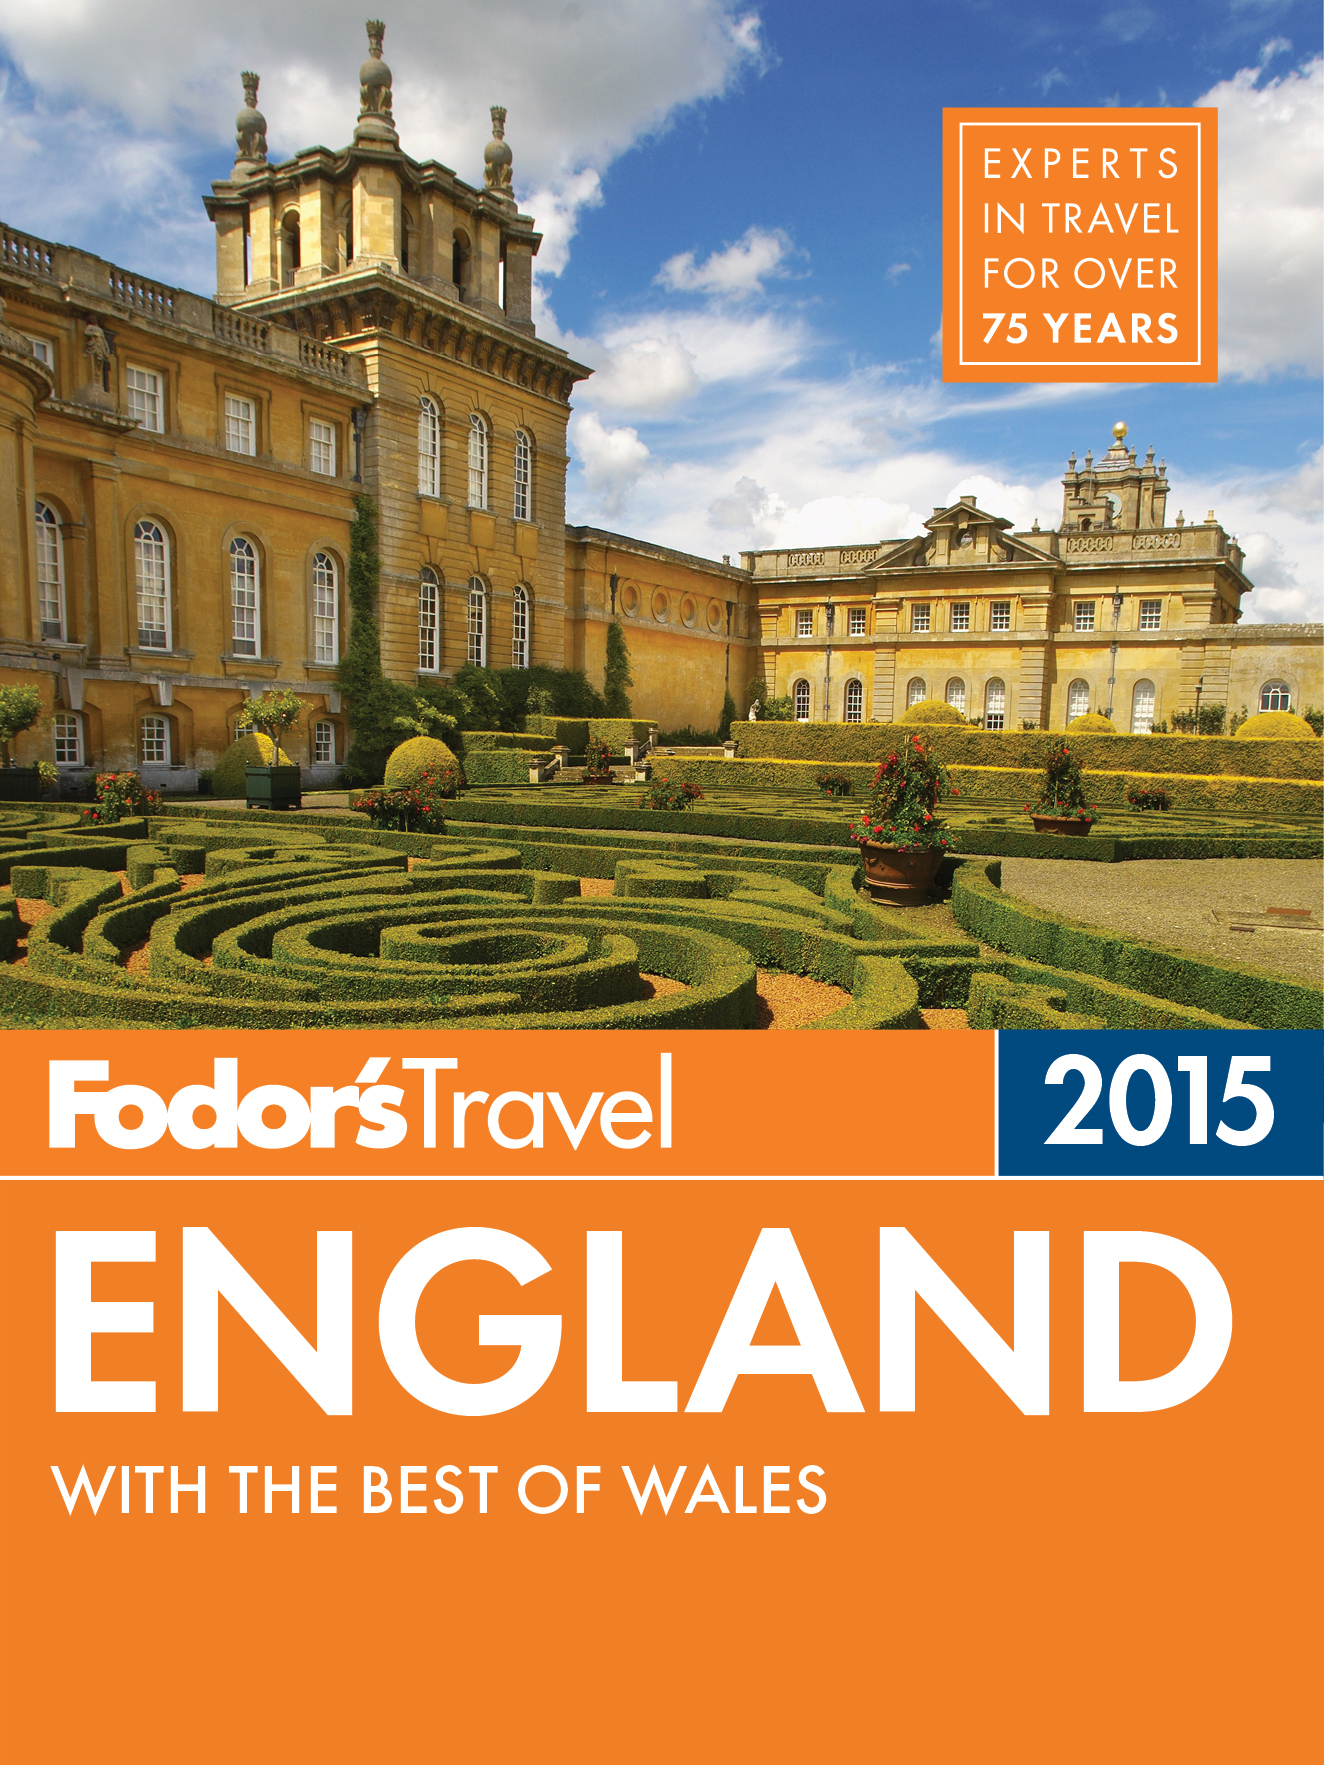 Fodors England 2015 with the best of Wales - photo 1